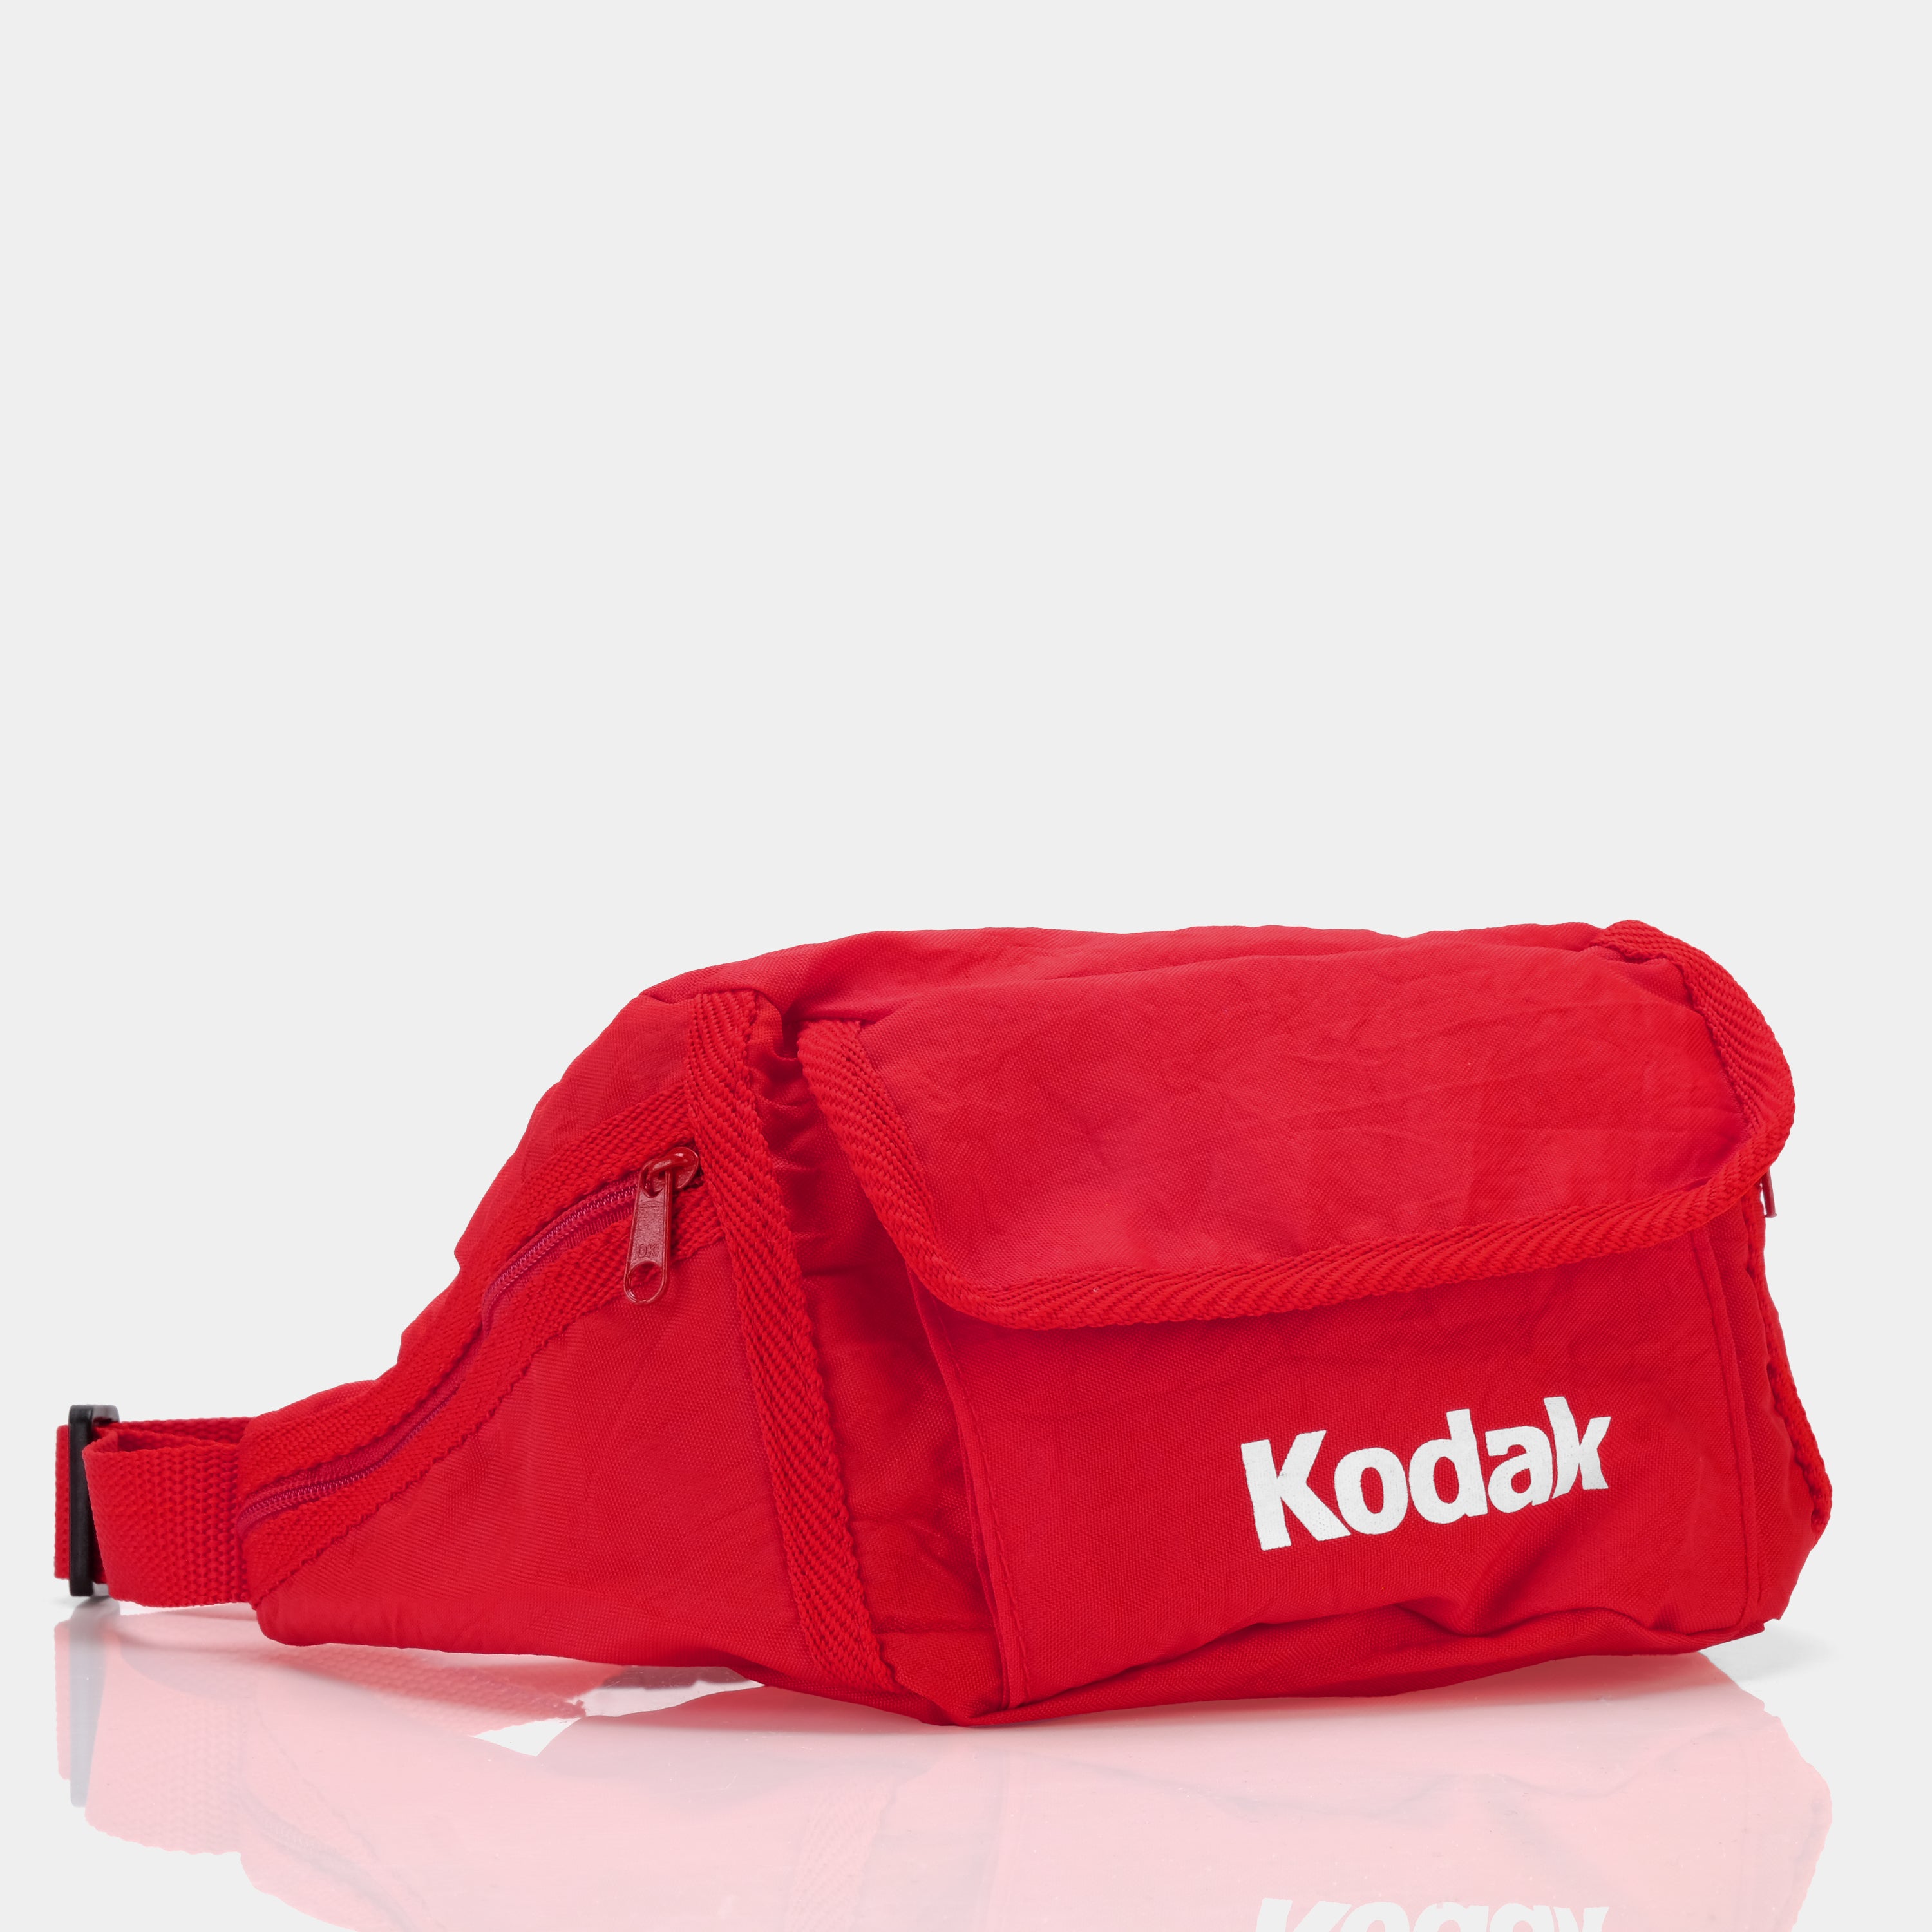 Vintage Promotional Kodak Red Fanny Pack (New Old Stock)